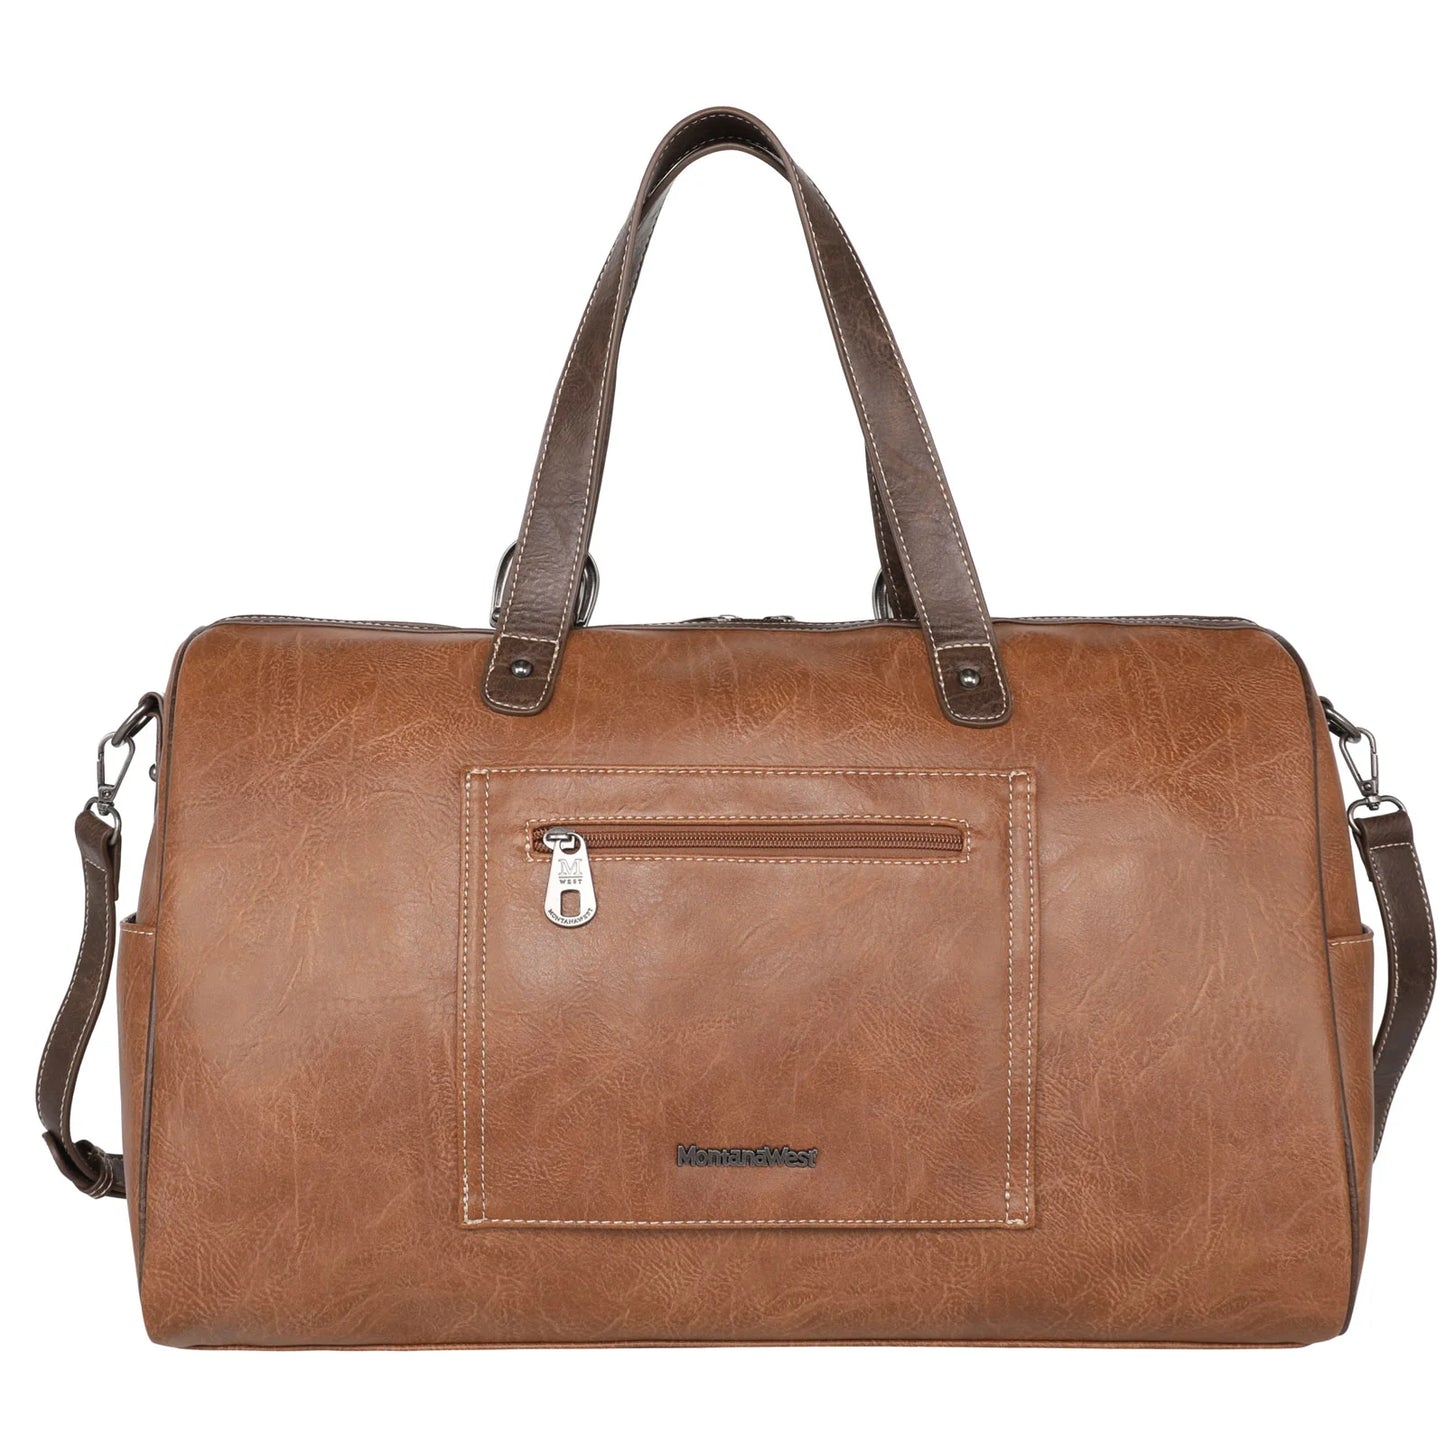 MW12095110 - Montana West Buckle Collection Weekender Bag